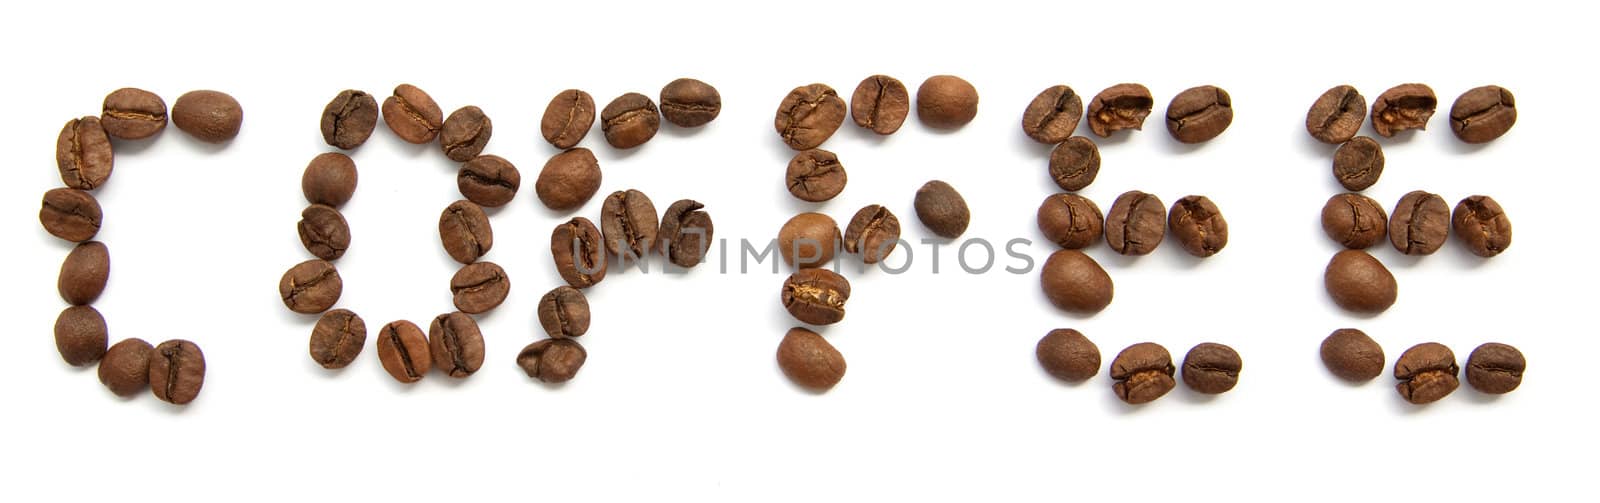 coffee text made of single coffee beans